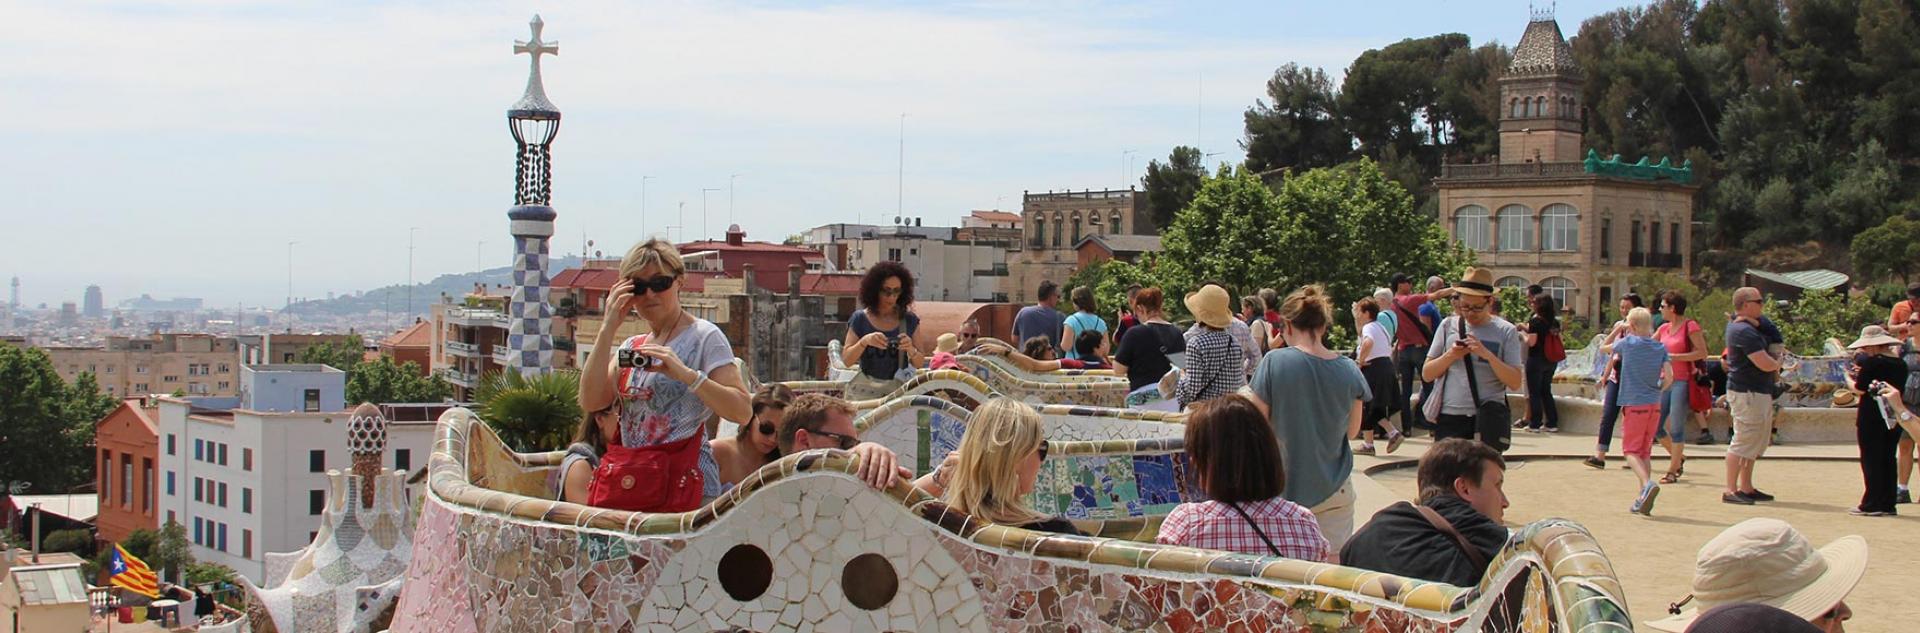 barcelone-parc-guell